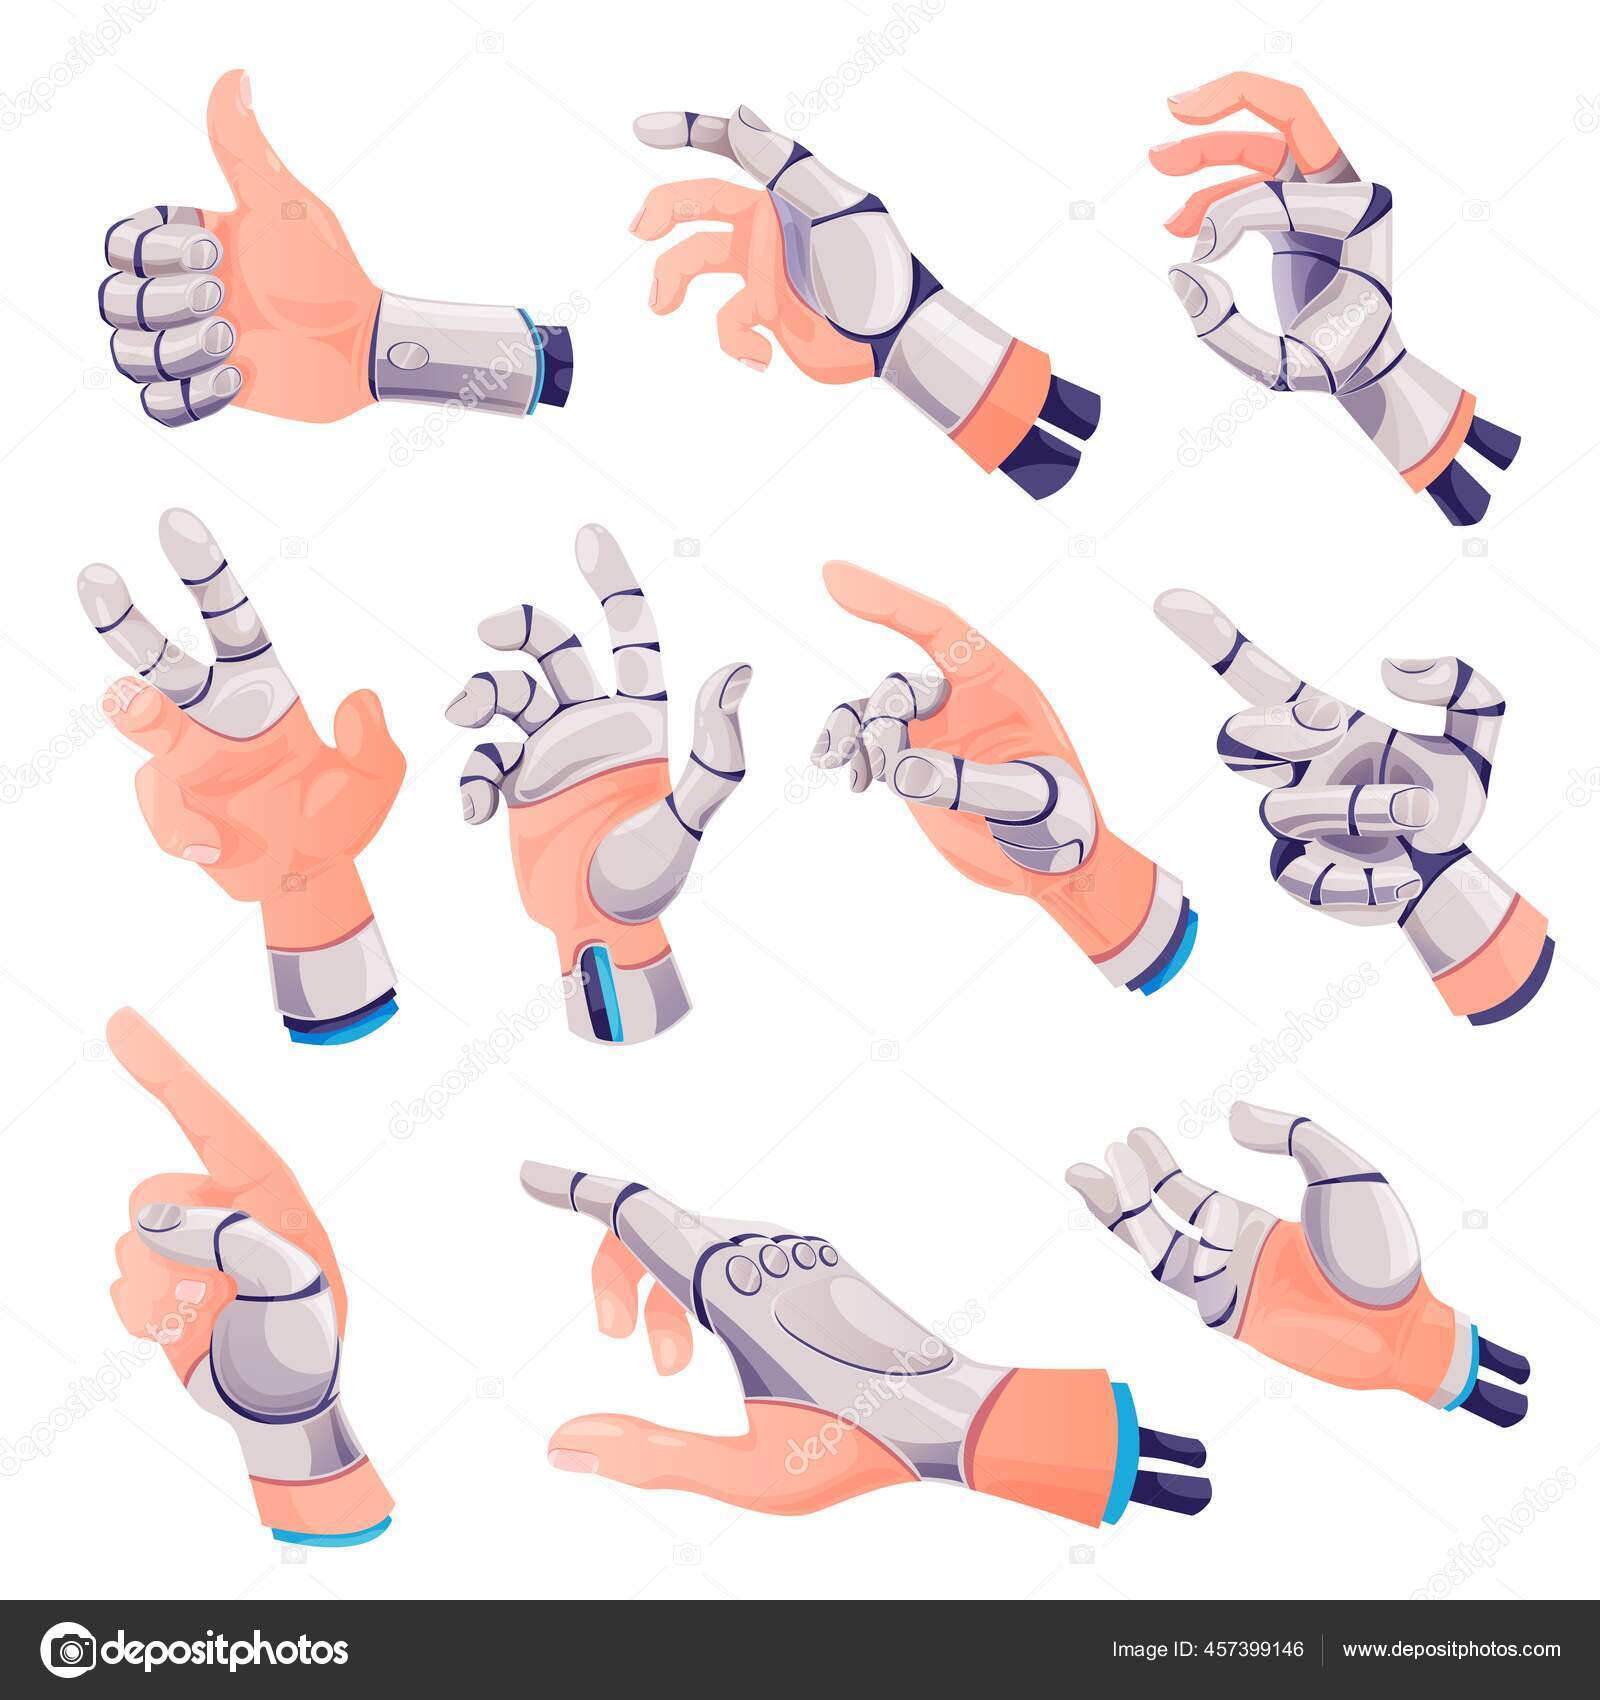 Human Hands Fingers Robotic Prosthesis Showing Thumbs Hand